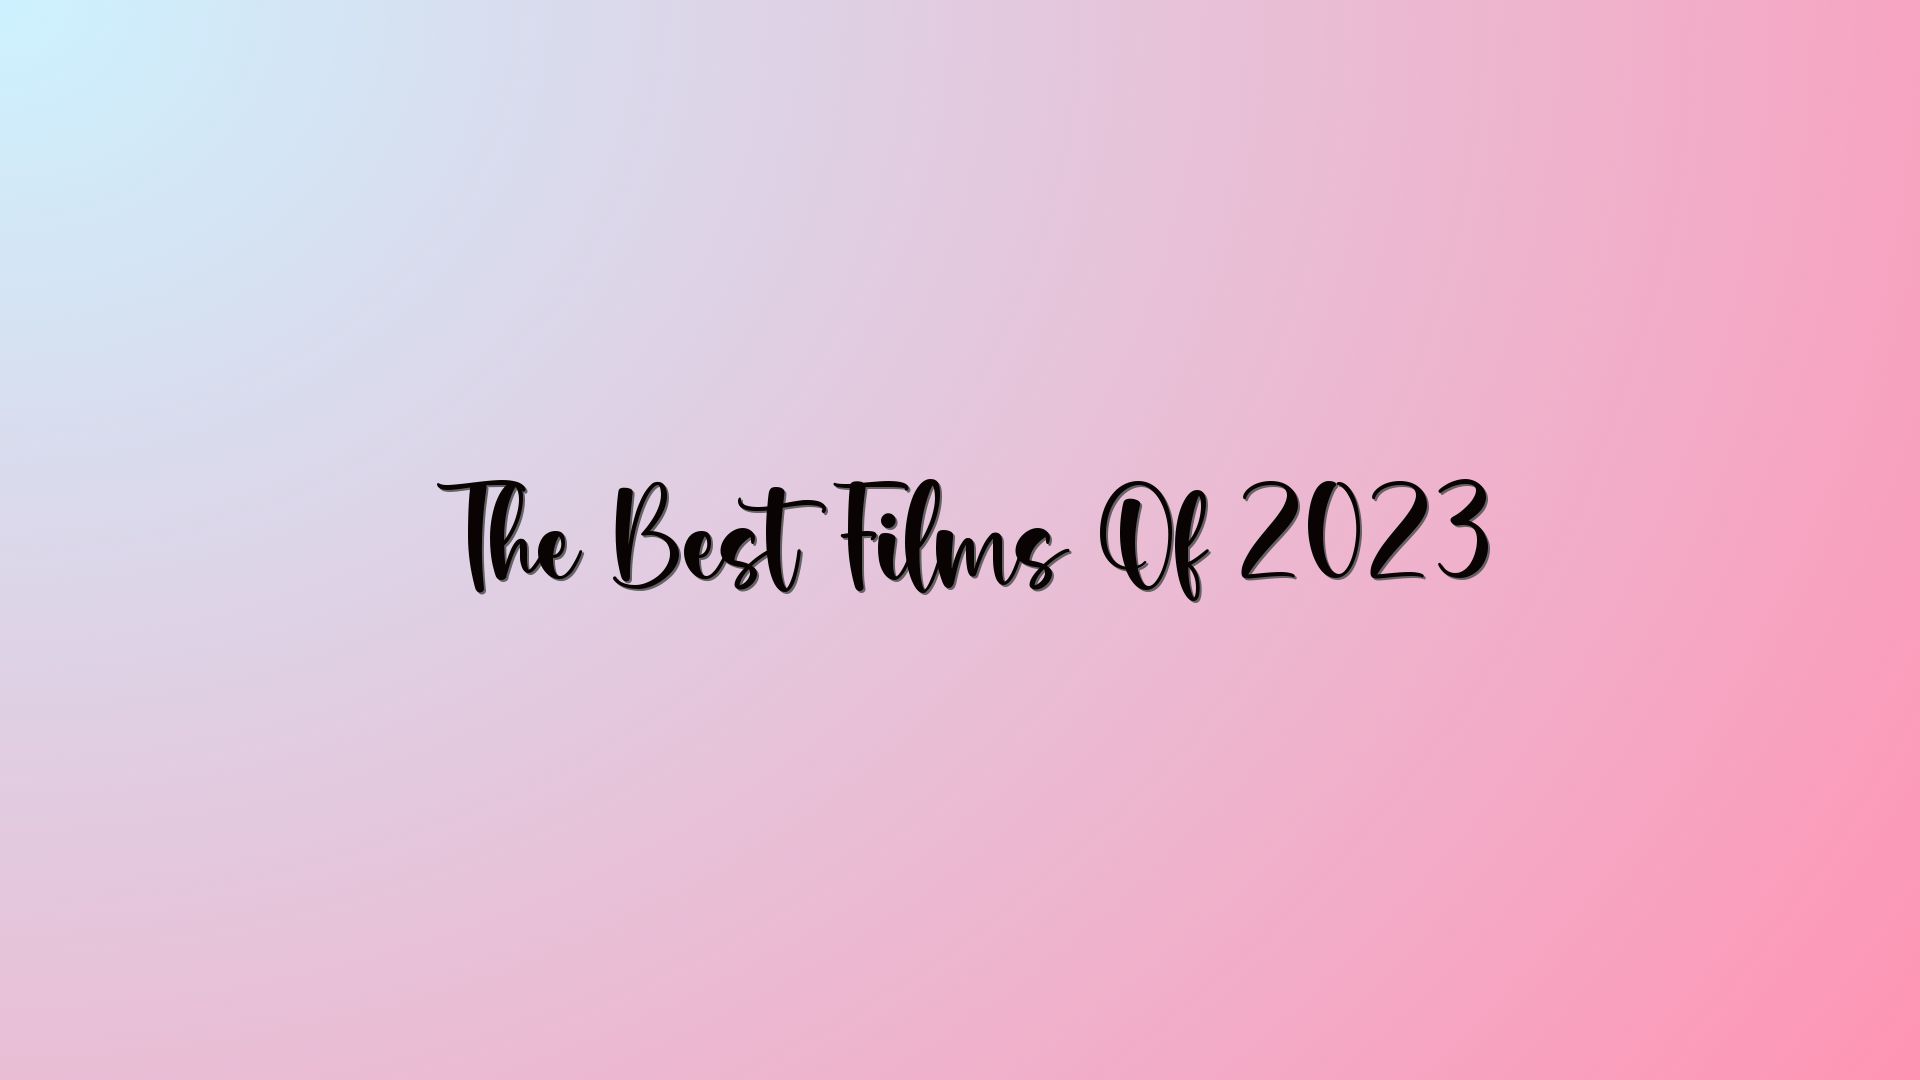 The Best Films Of 2023